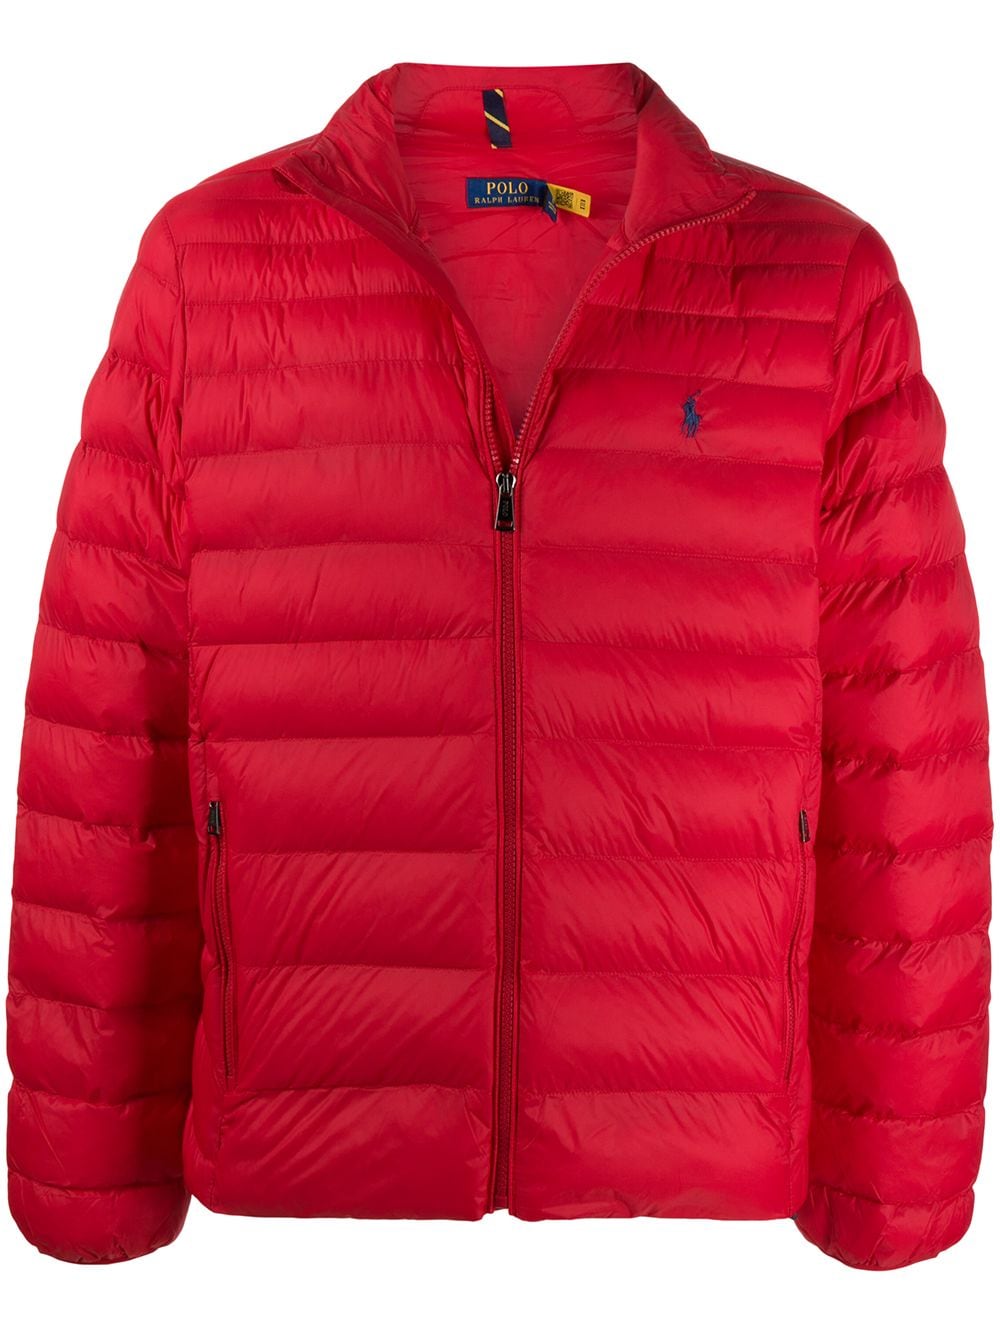 red polo puffer jacket